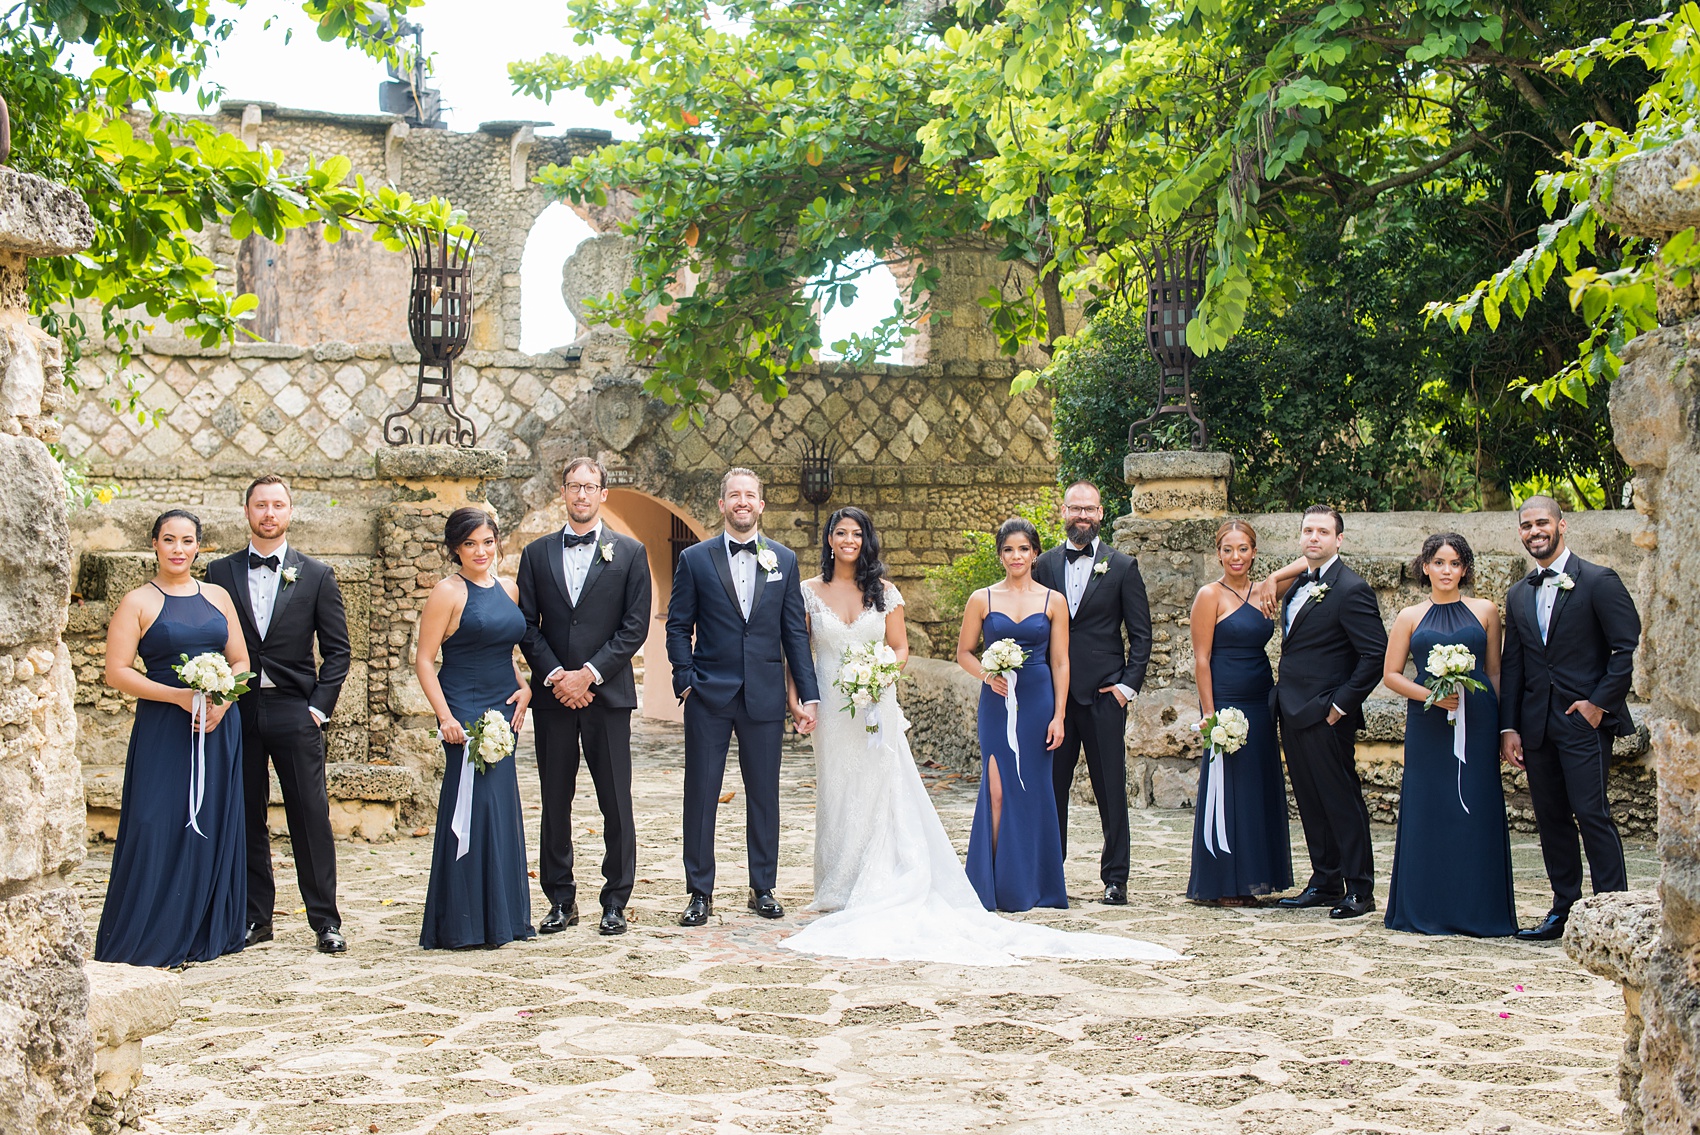 If you’re planning a destination wedding Casa de Campo in the Dominican Republic is a great location. It’s in La Romana, an hour from Punta Cana, and is an all inclusive resort with tropical Minitas beach and mountains view. It’s a beautiful venue, which these pictures by Mikkel Paige Photography prove. Click through for more bridesmaids, groomsmen and wedding party ideas! Coordination by @theeventeur, makeup by NYC Beauty Clique. #mikkelpaige #weddingparty #navybluewedding